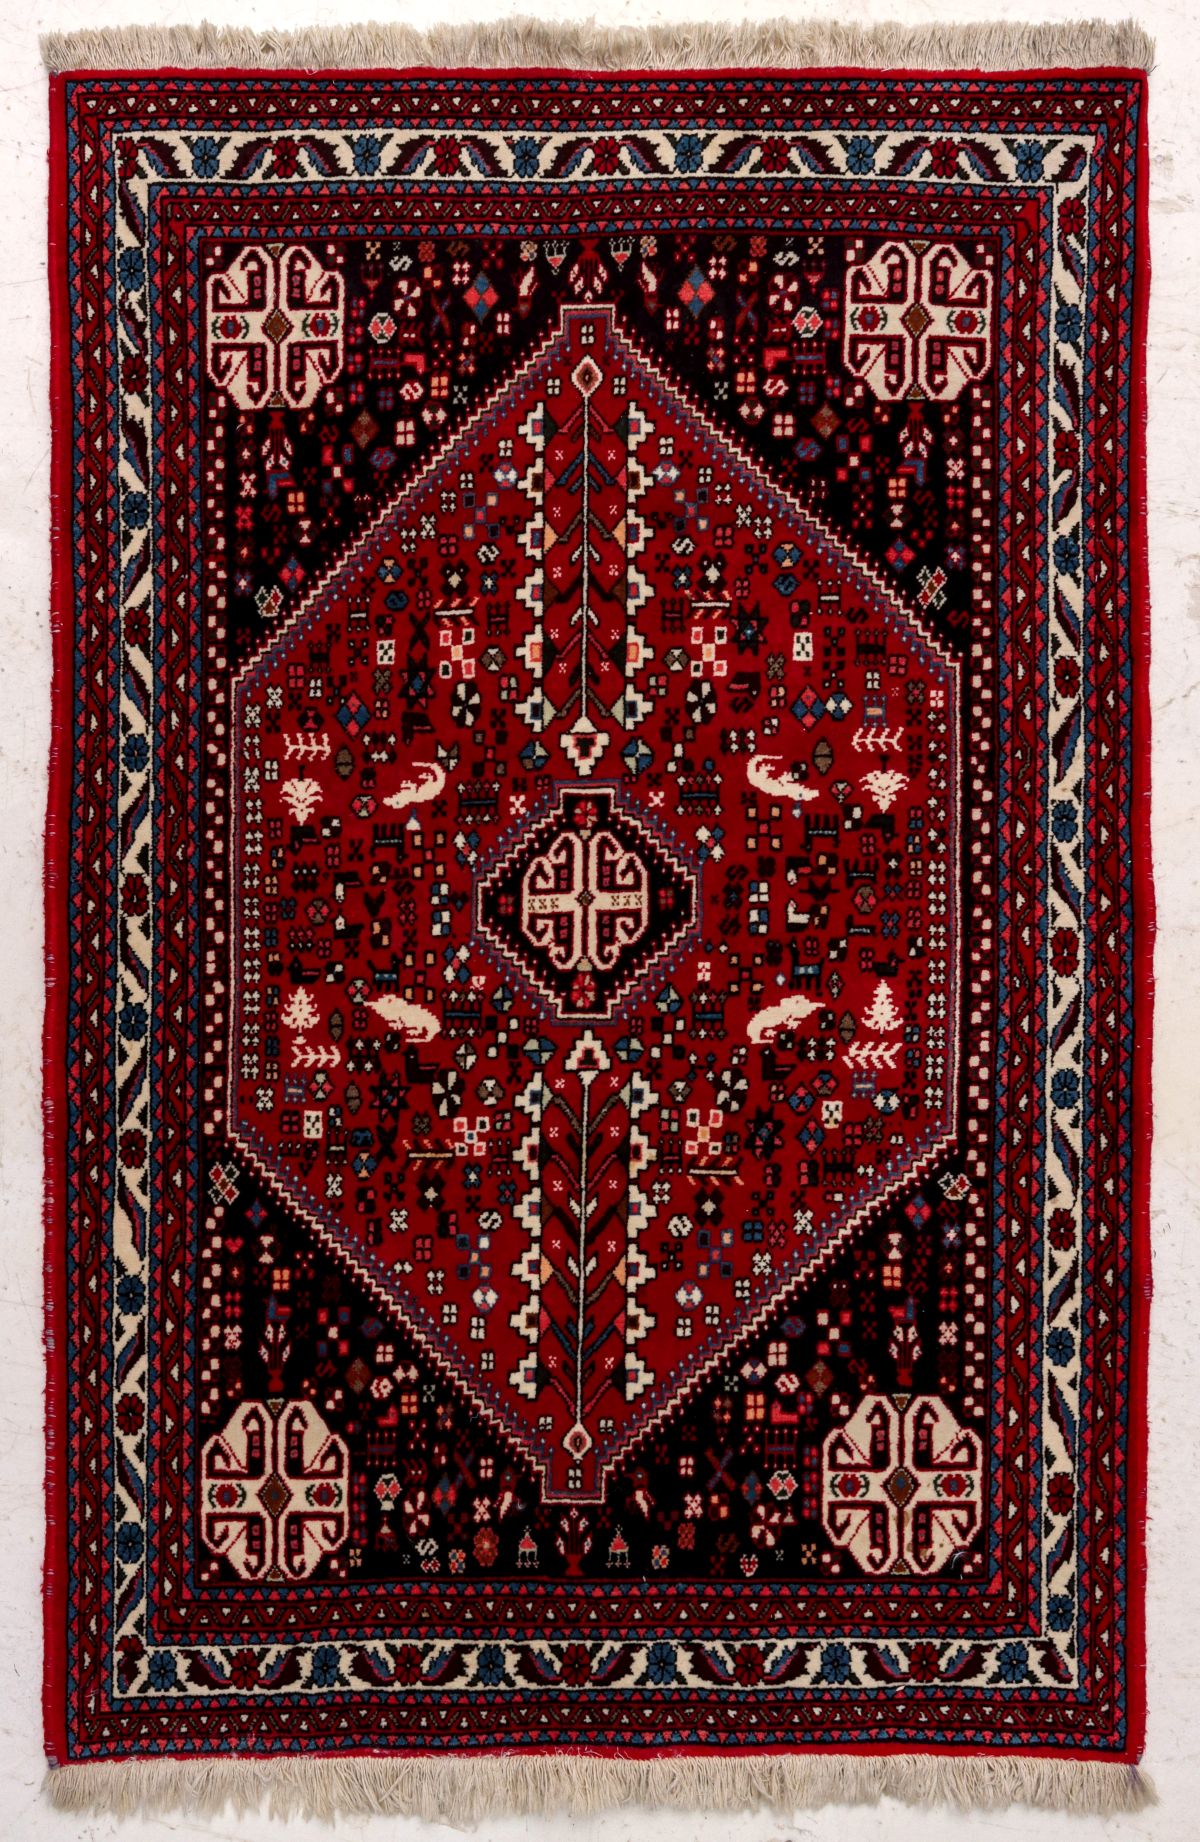 A LATE 20TH CENTURY HAND MADE RUG WITH REPTILE FIGURES